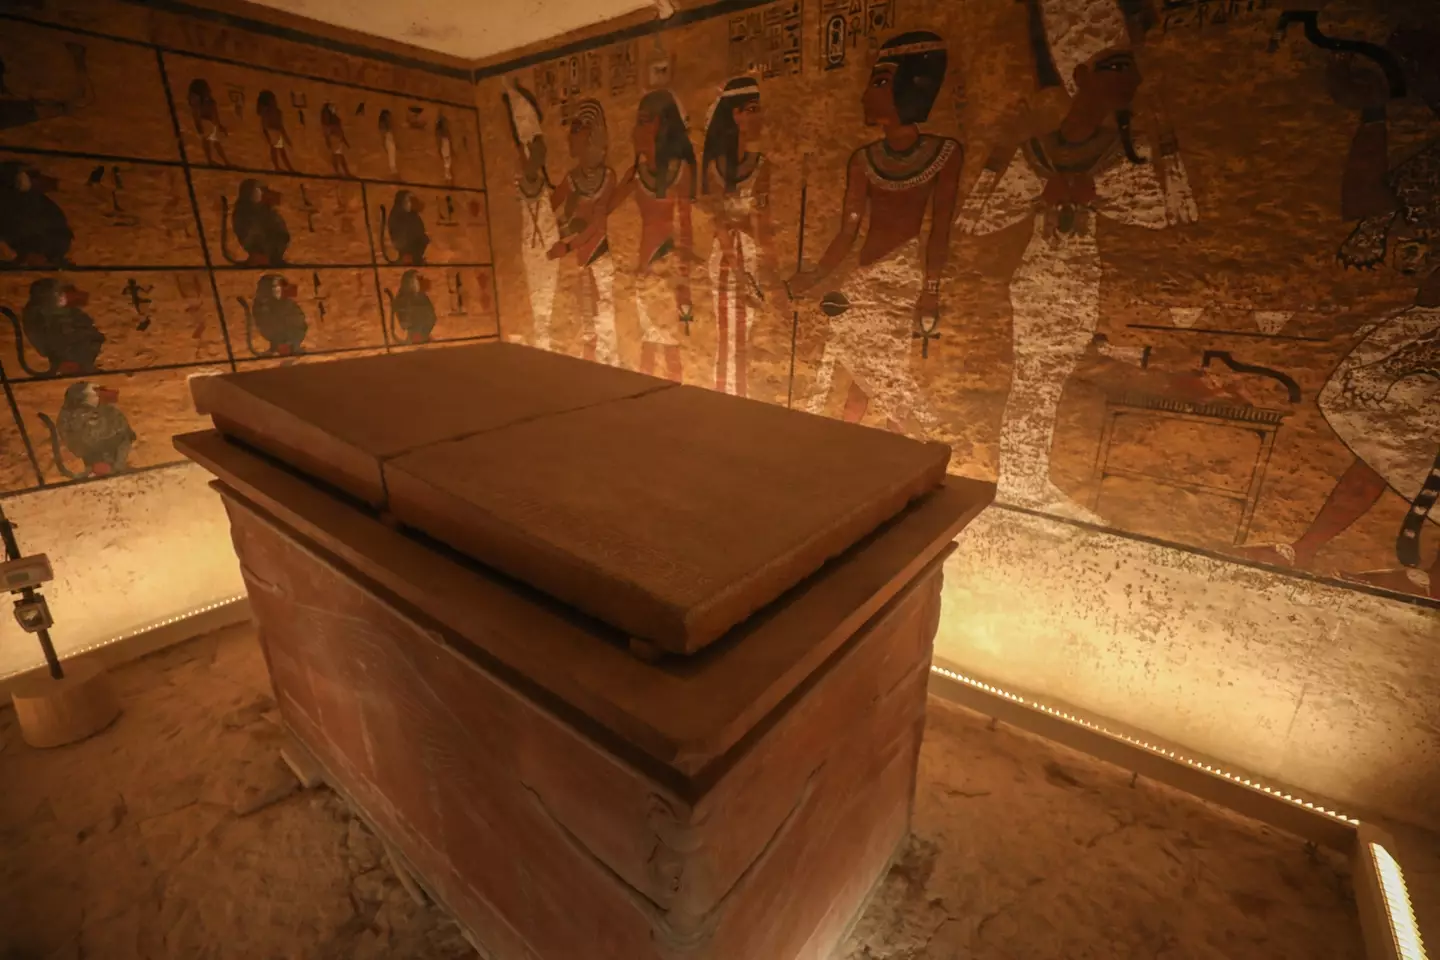 The tomb of Tutankhamun. (Mohamed Elshahed/Anadolu Agency via Getty Images)